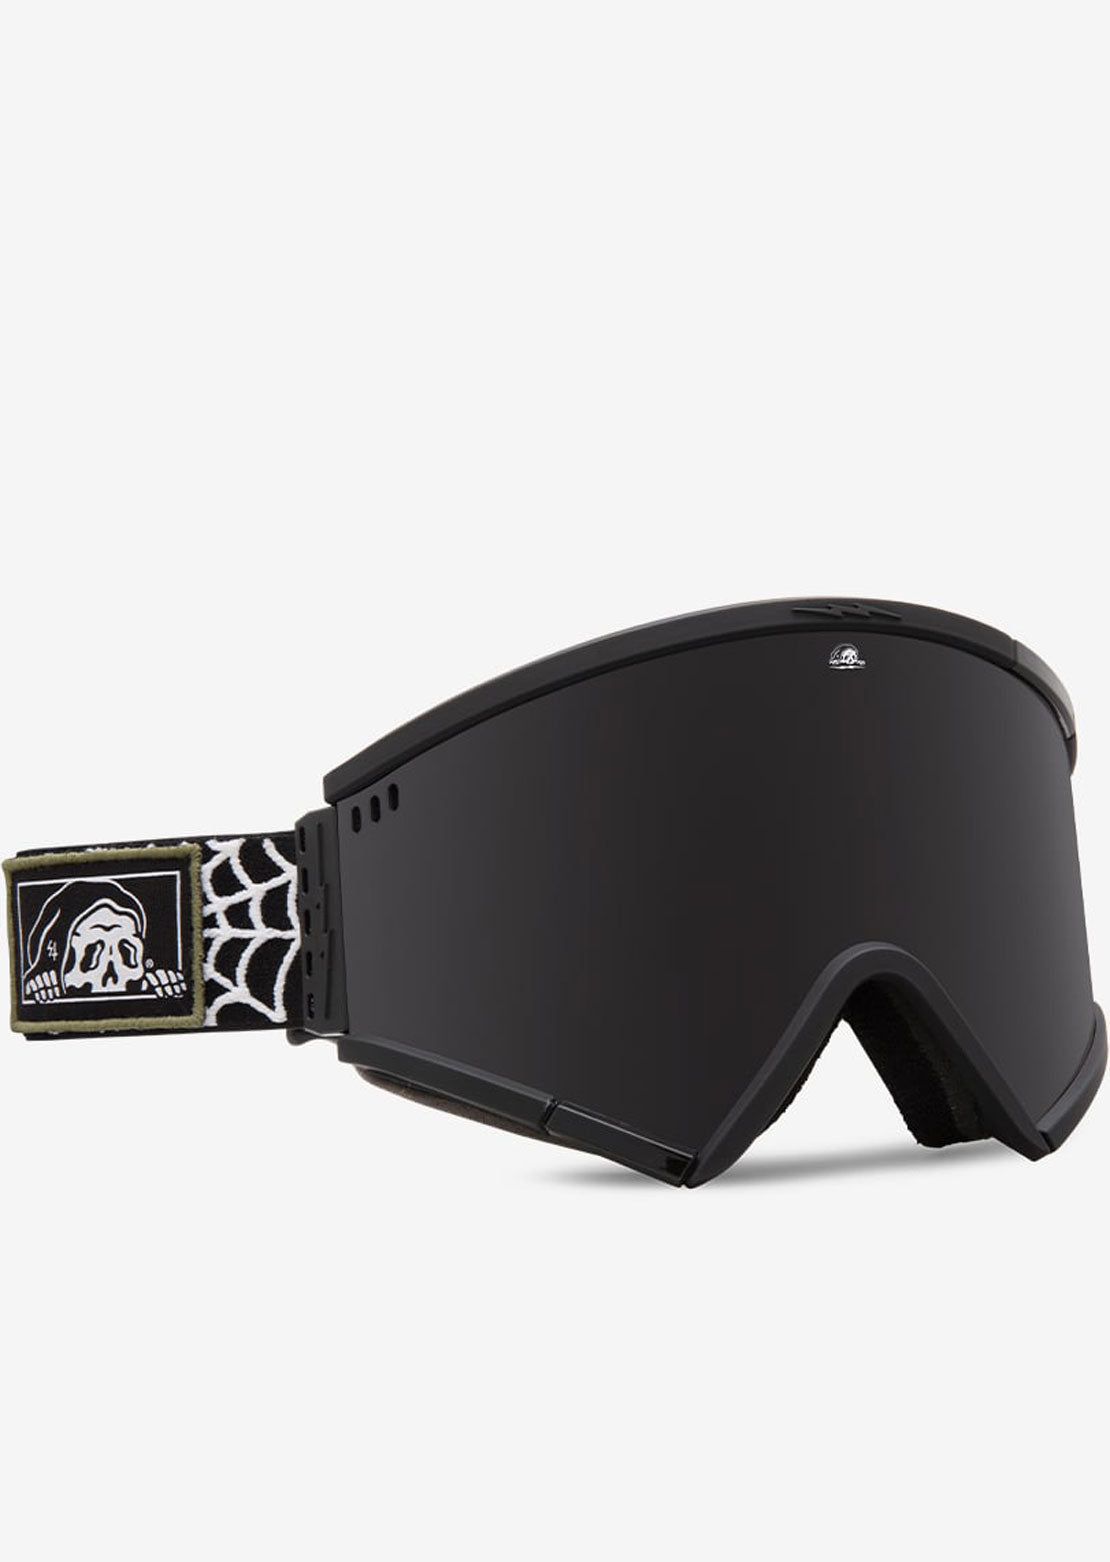 Electric Roteck Snow Goggles Lurking Class Collab/Onyx